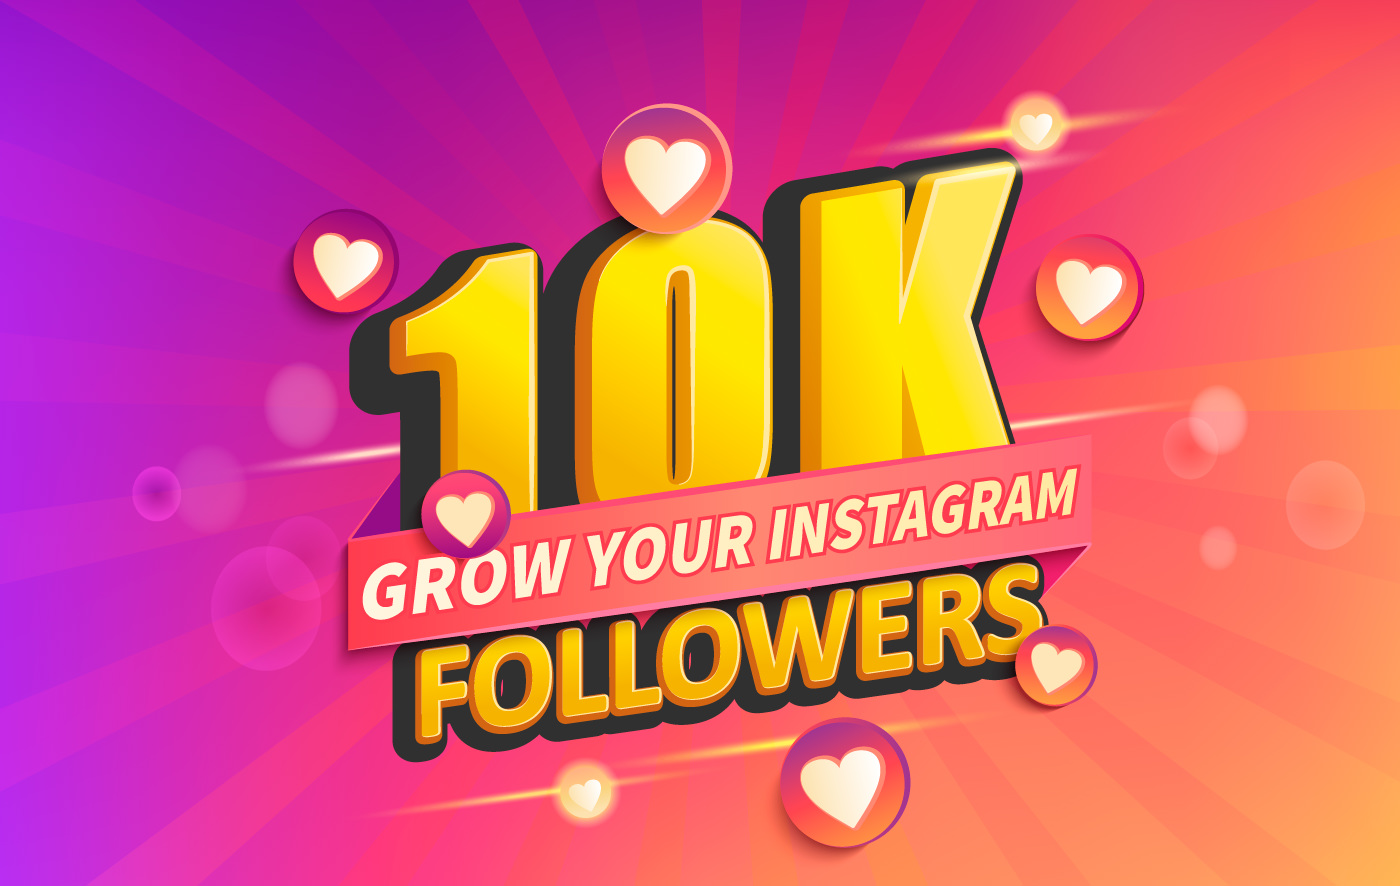 Free Instagram Account With 10k Followers